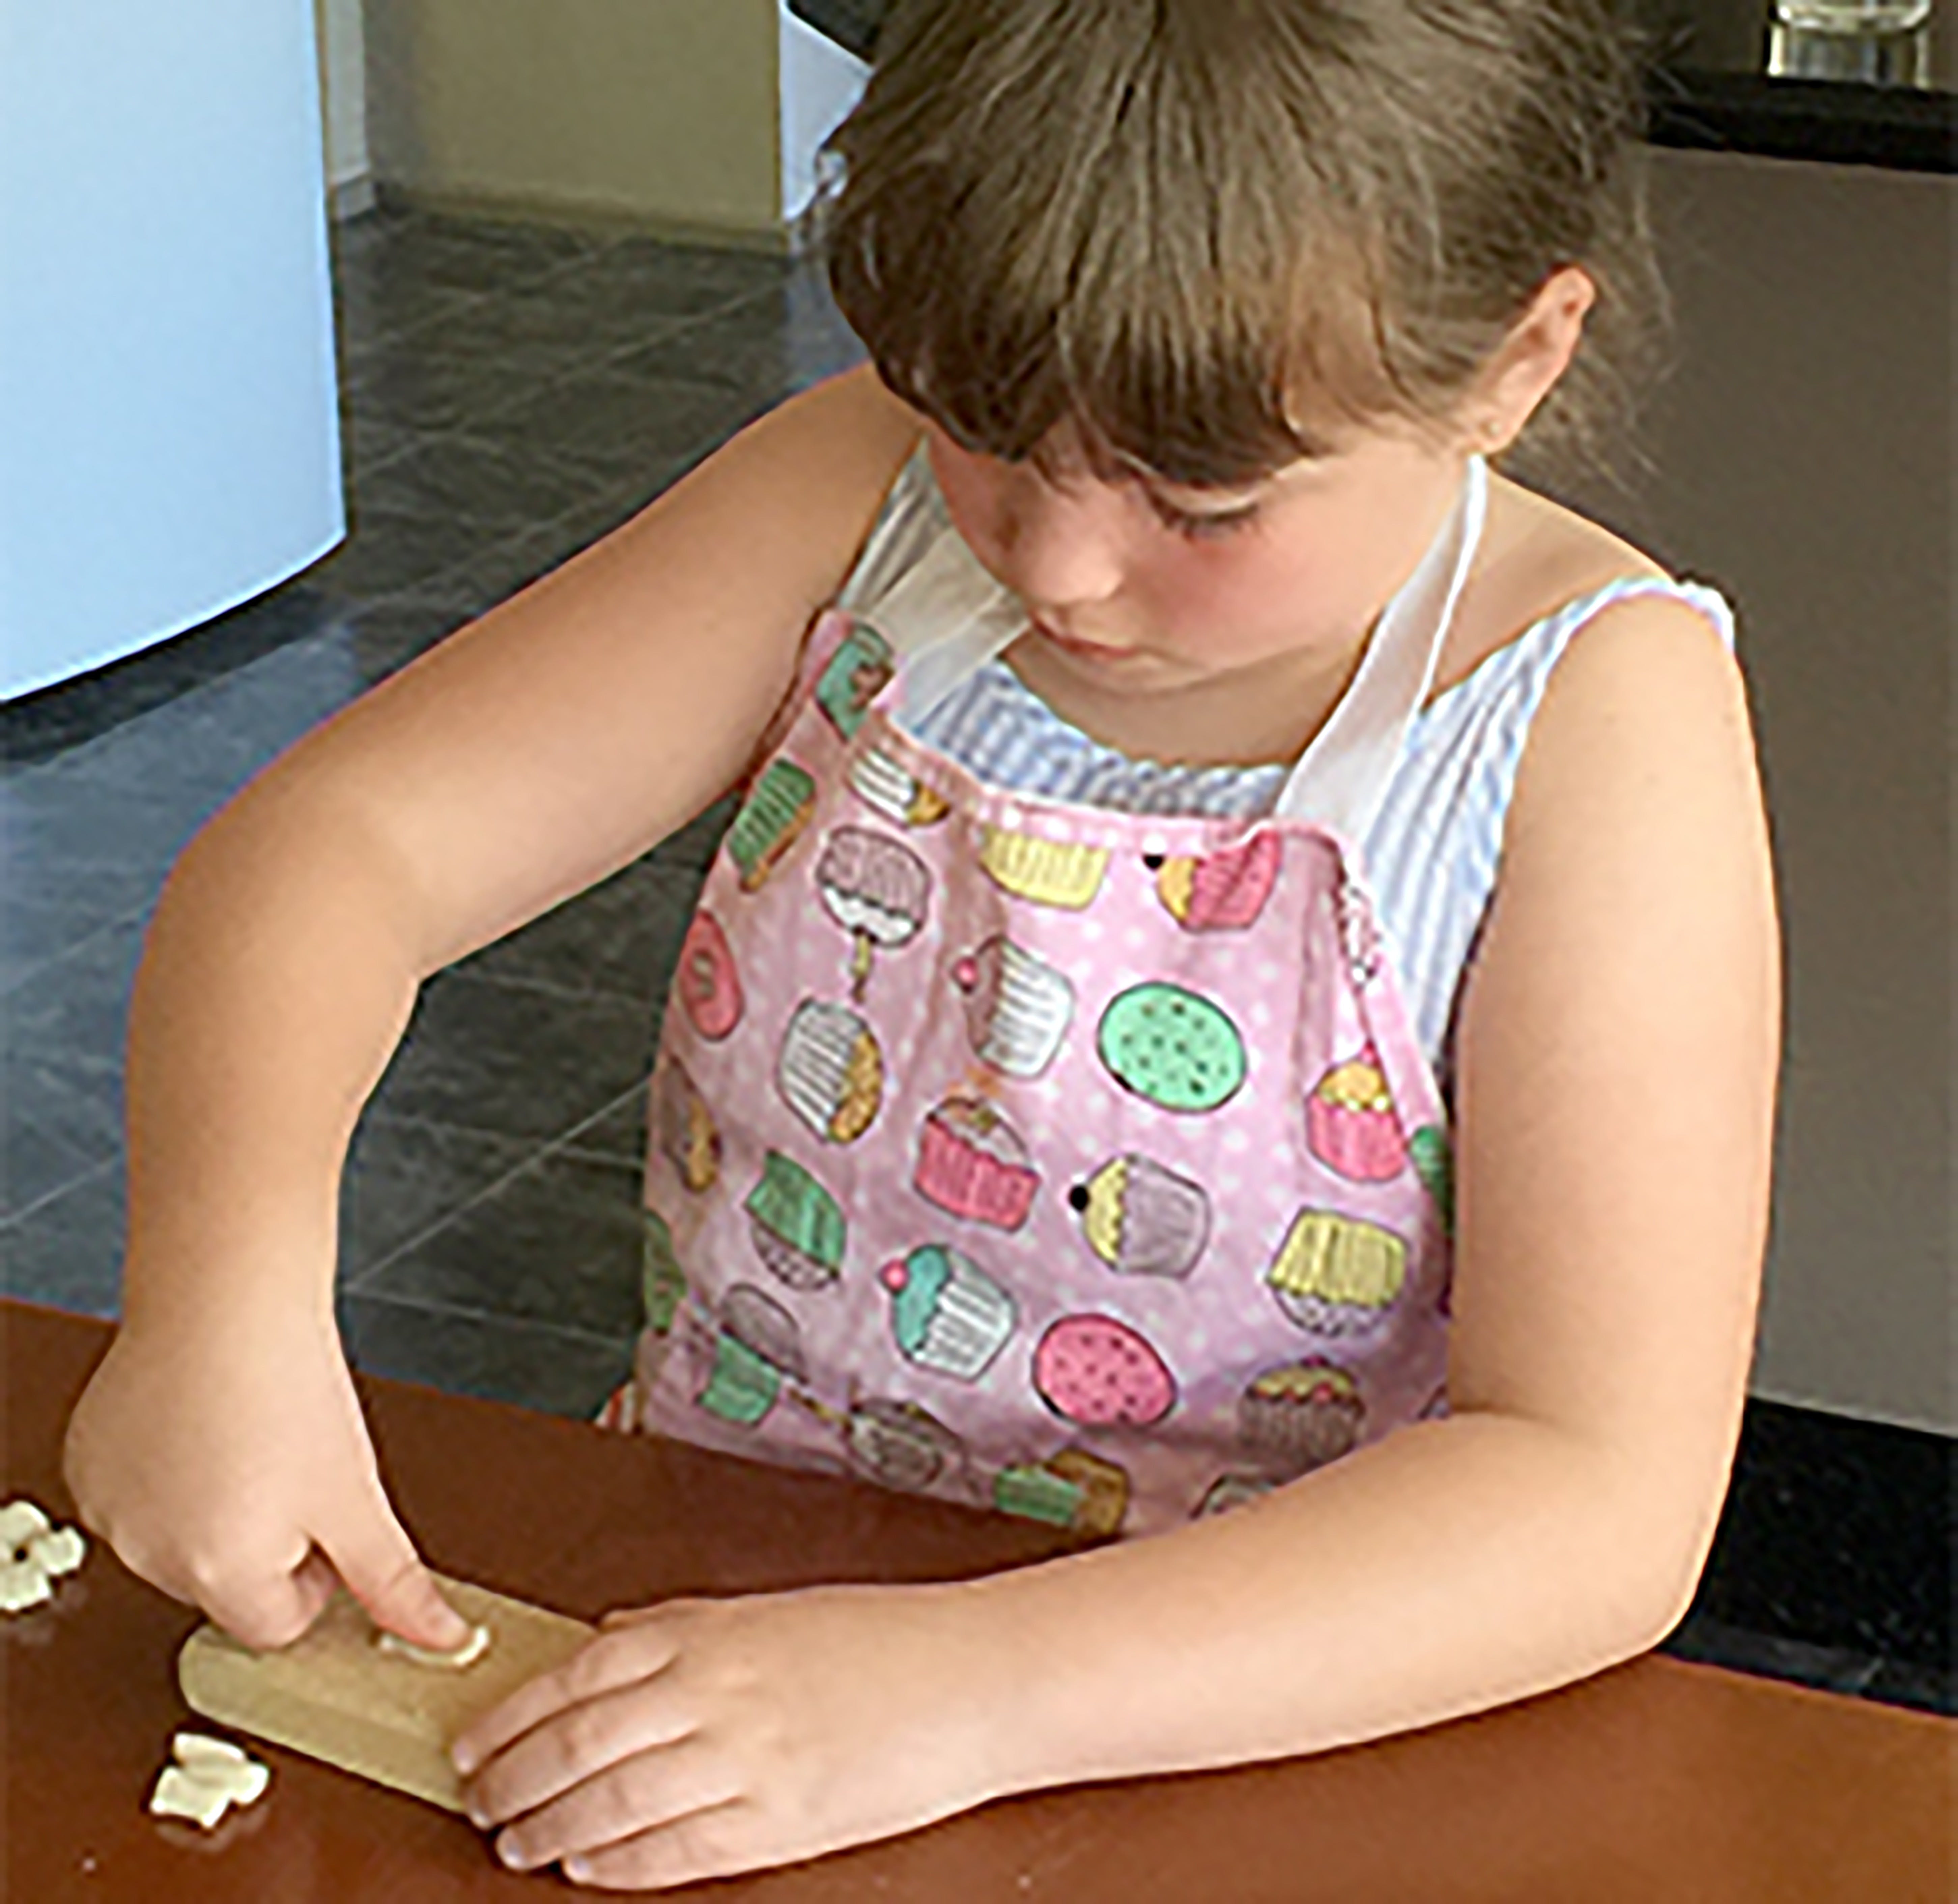 Kids Pasta Making Class - Hands On Fun At Your House! - thumb 2